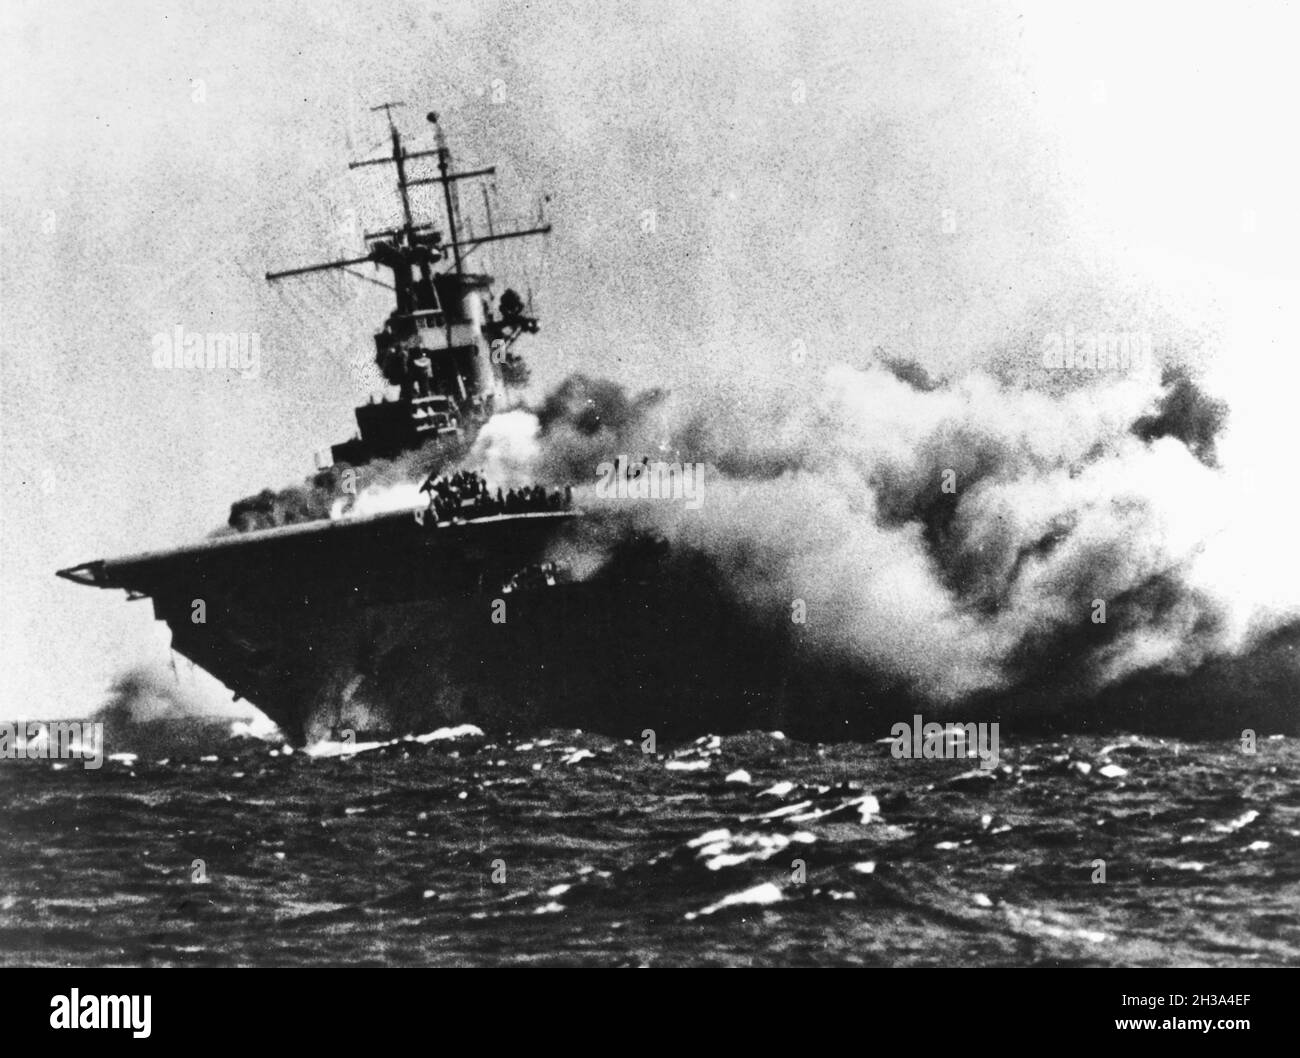 The U.S. aircraft carrier USS Wasp (CV-7) burning after receiving three torpedo hits from the Japanese submarine I-19 east of the Solomons, 15 September 1942. Stock Photo